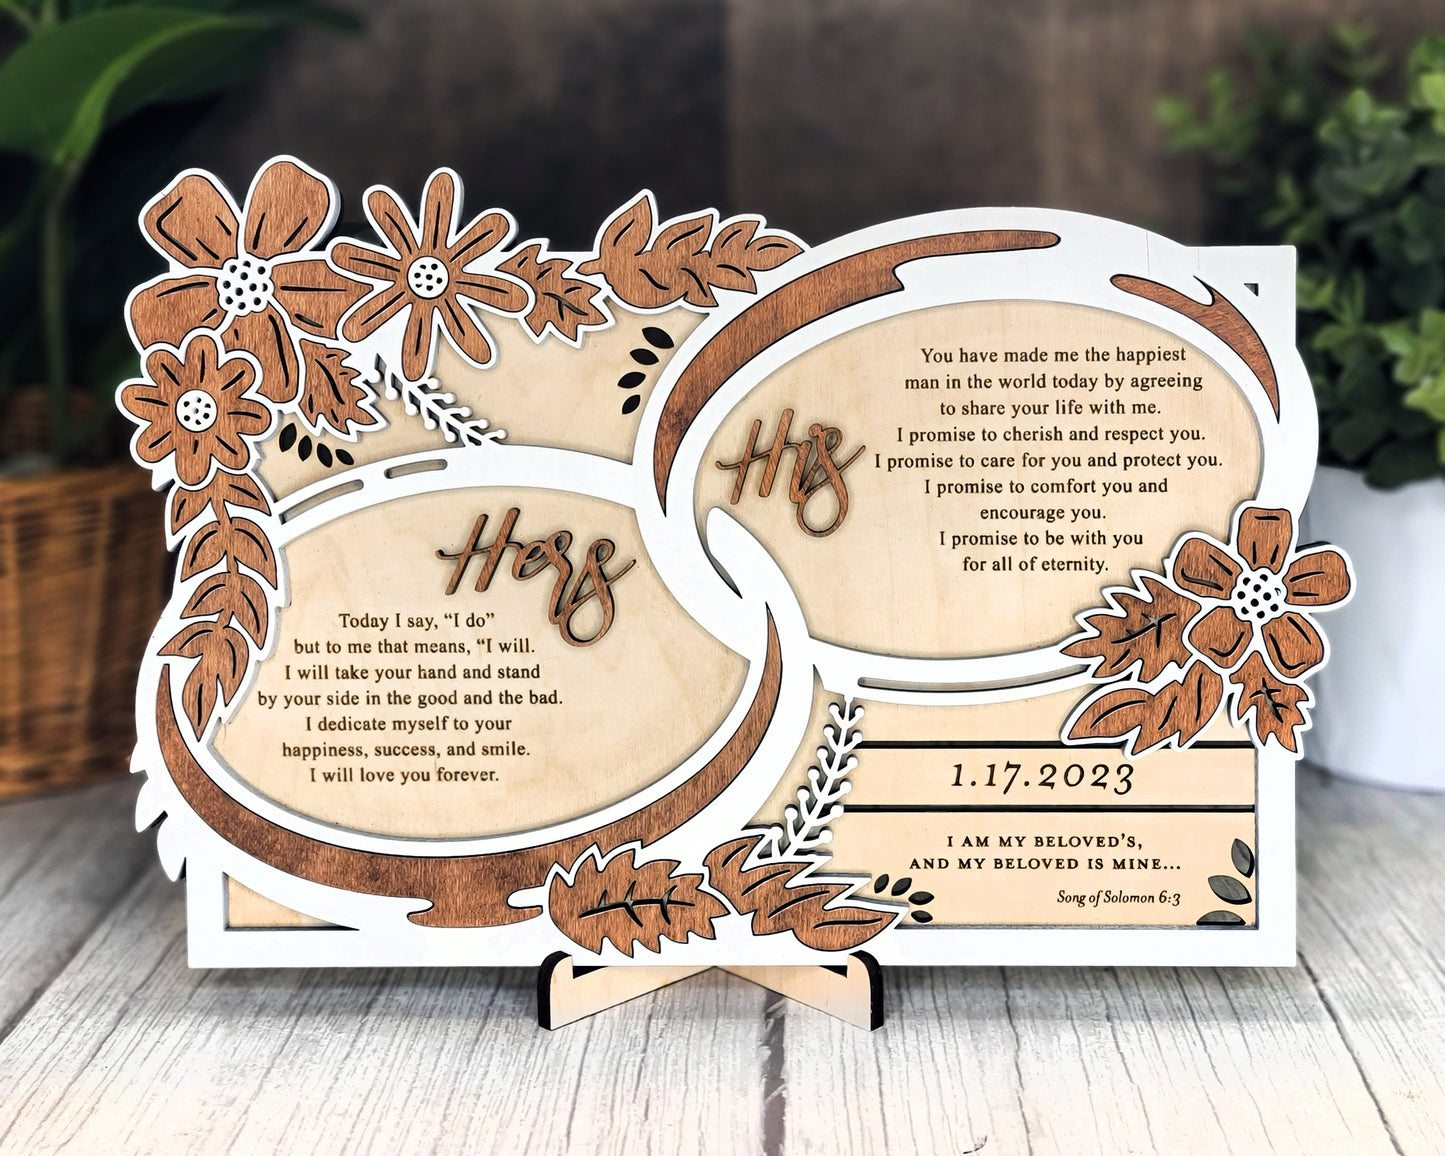 The Wedding Vow Display - Horizontal and Vertical versions included - SVG File Download - Glowforge & Lightburn Tested